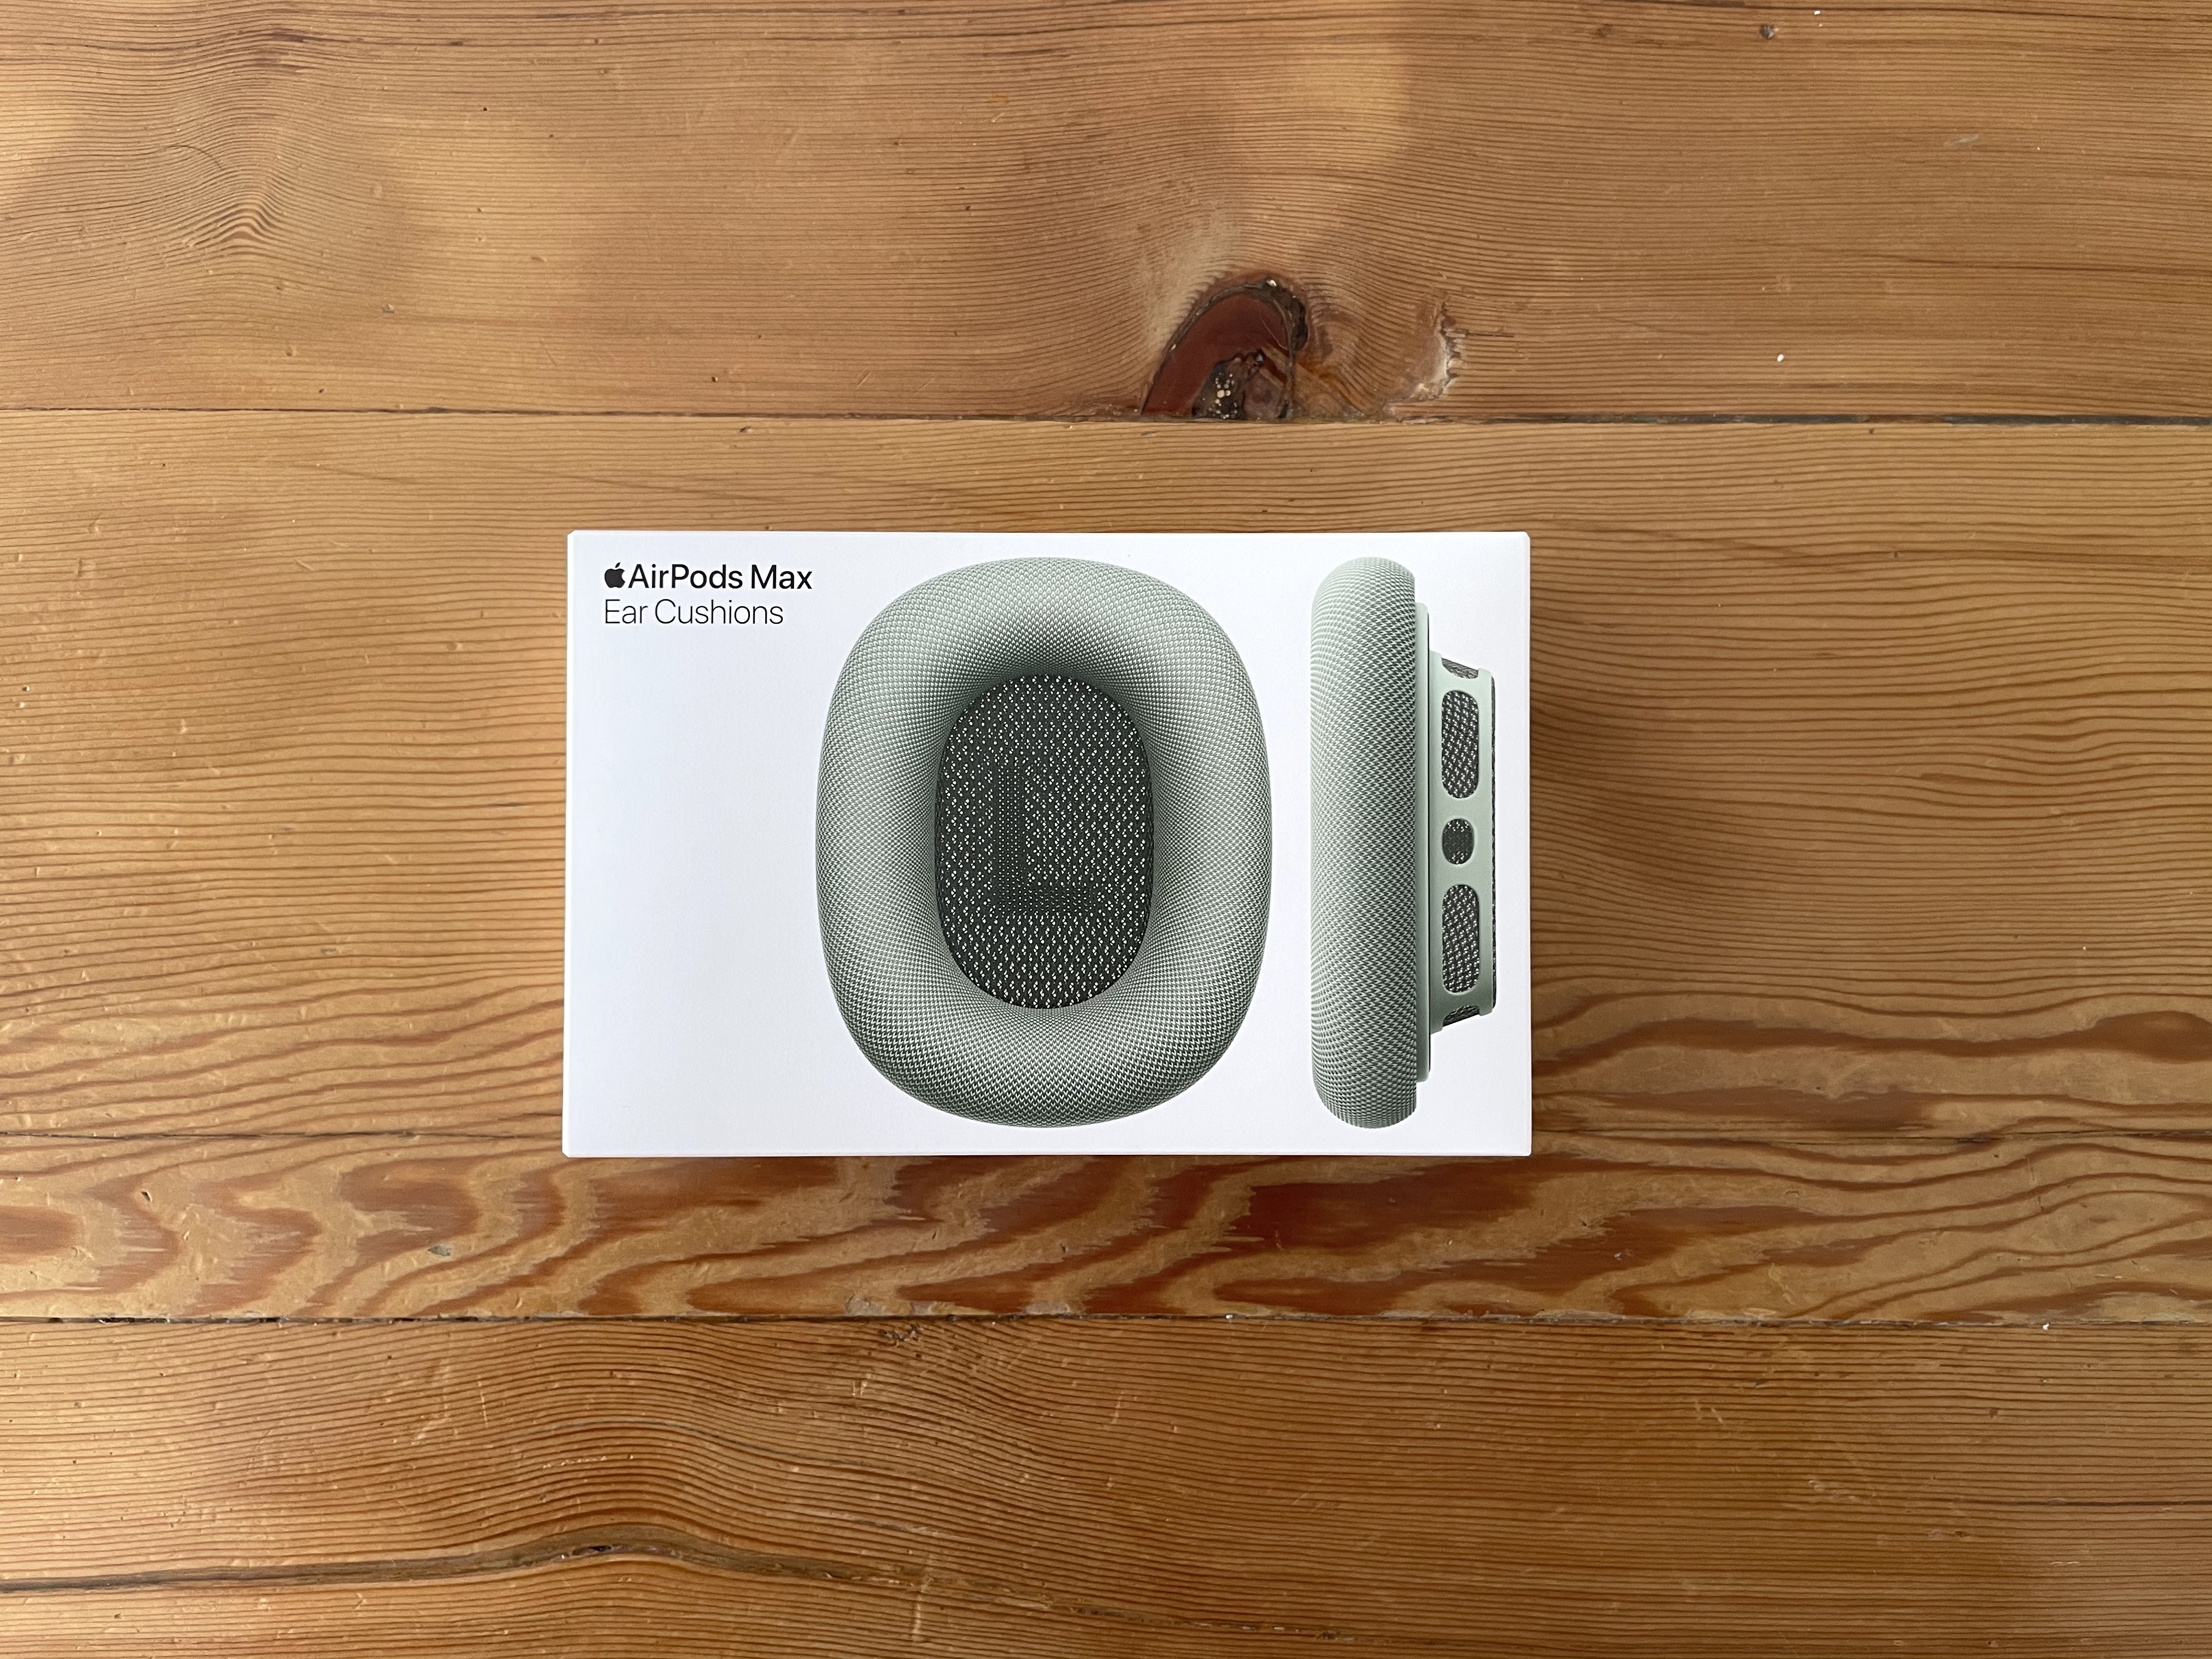 Hands-on: Unboxing and first look at standalone AirPods Max ear